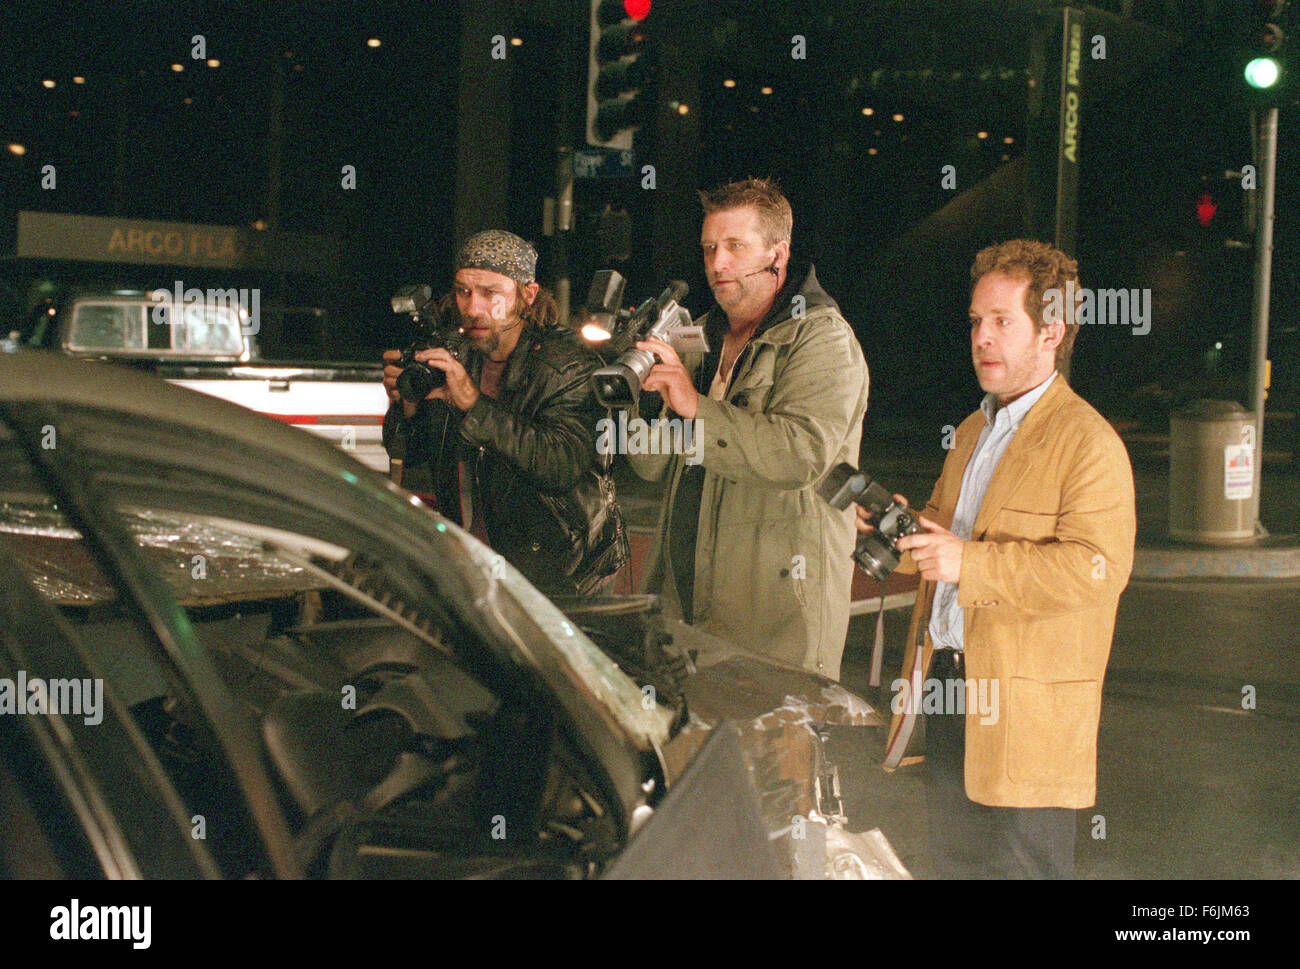 RELEASE DATE: September 3, 2004. MOVIE TITLE: Paparazzi. STUDIO: 20th Century Fox. PLOT: A rising Hollywood actor decides to take personal revenge against a group of four persistent photographers to make them pay for almost causing a personal tragedy involving his wife and son. PICTURED: KEVIN GAGE as Kevin Rosner, DANIEL BALDWIN as Wendell Stokes and TOM HOLLANDER as Leonard Clark. Stock Photo